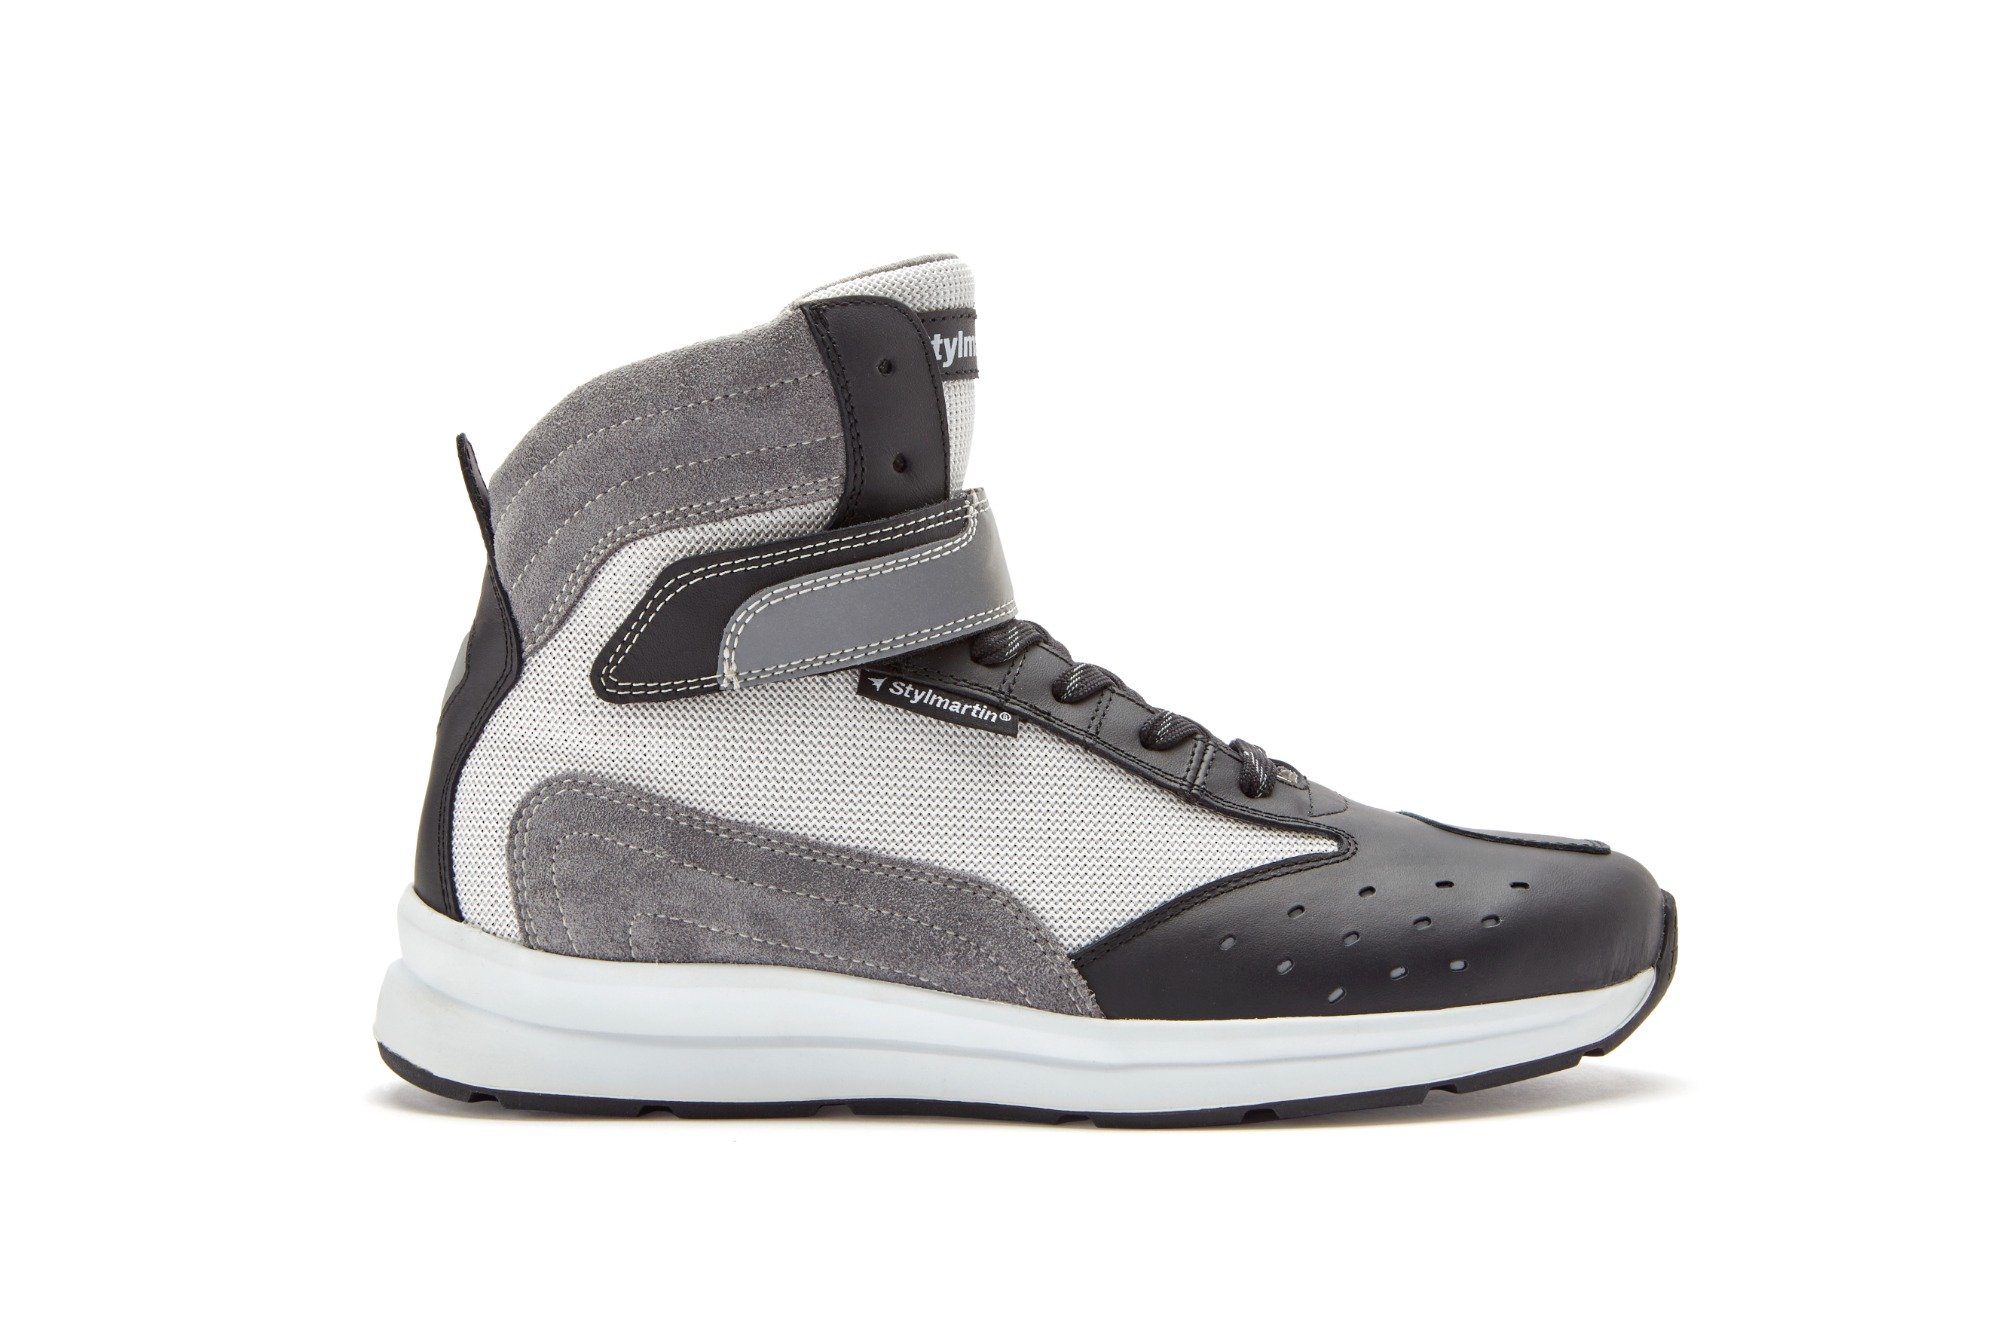 Image of Stylmartin Audax Air Black Anthracite White Size 37 ID 1000001309293